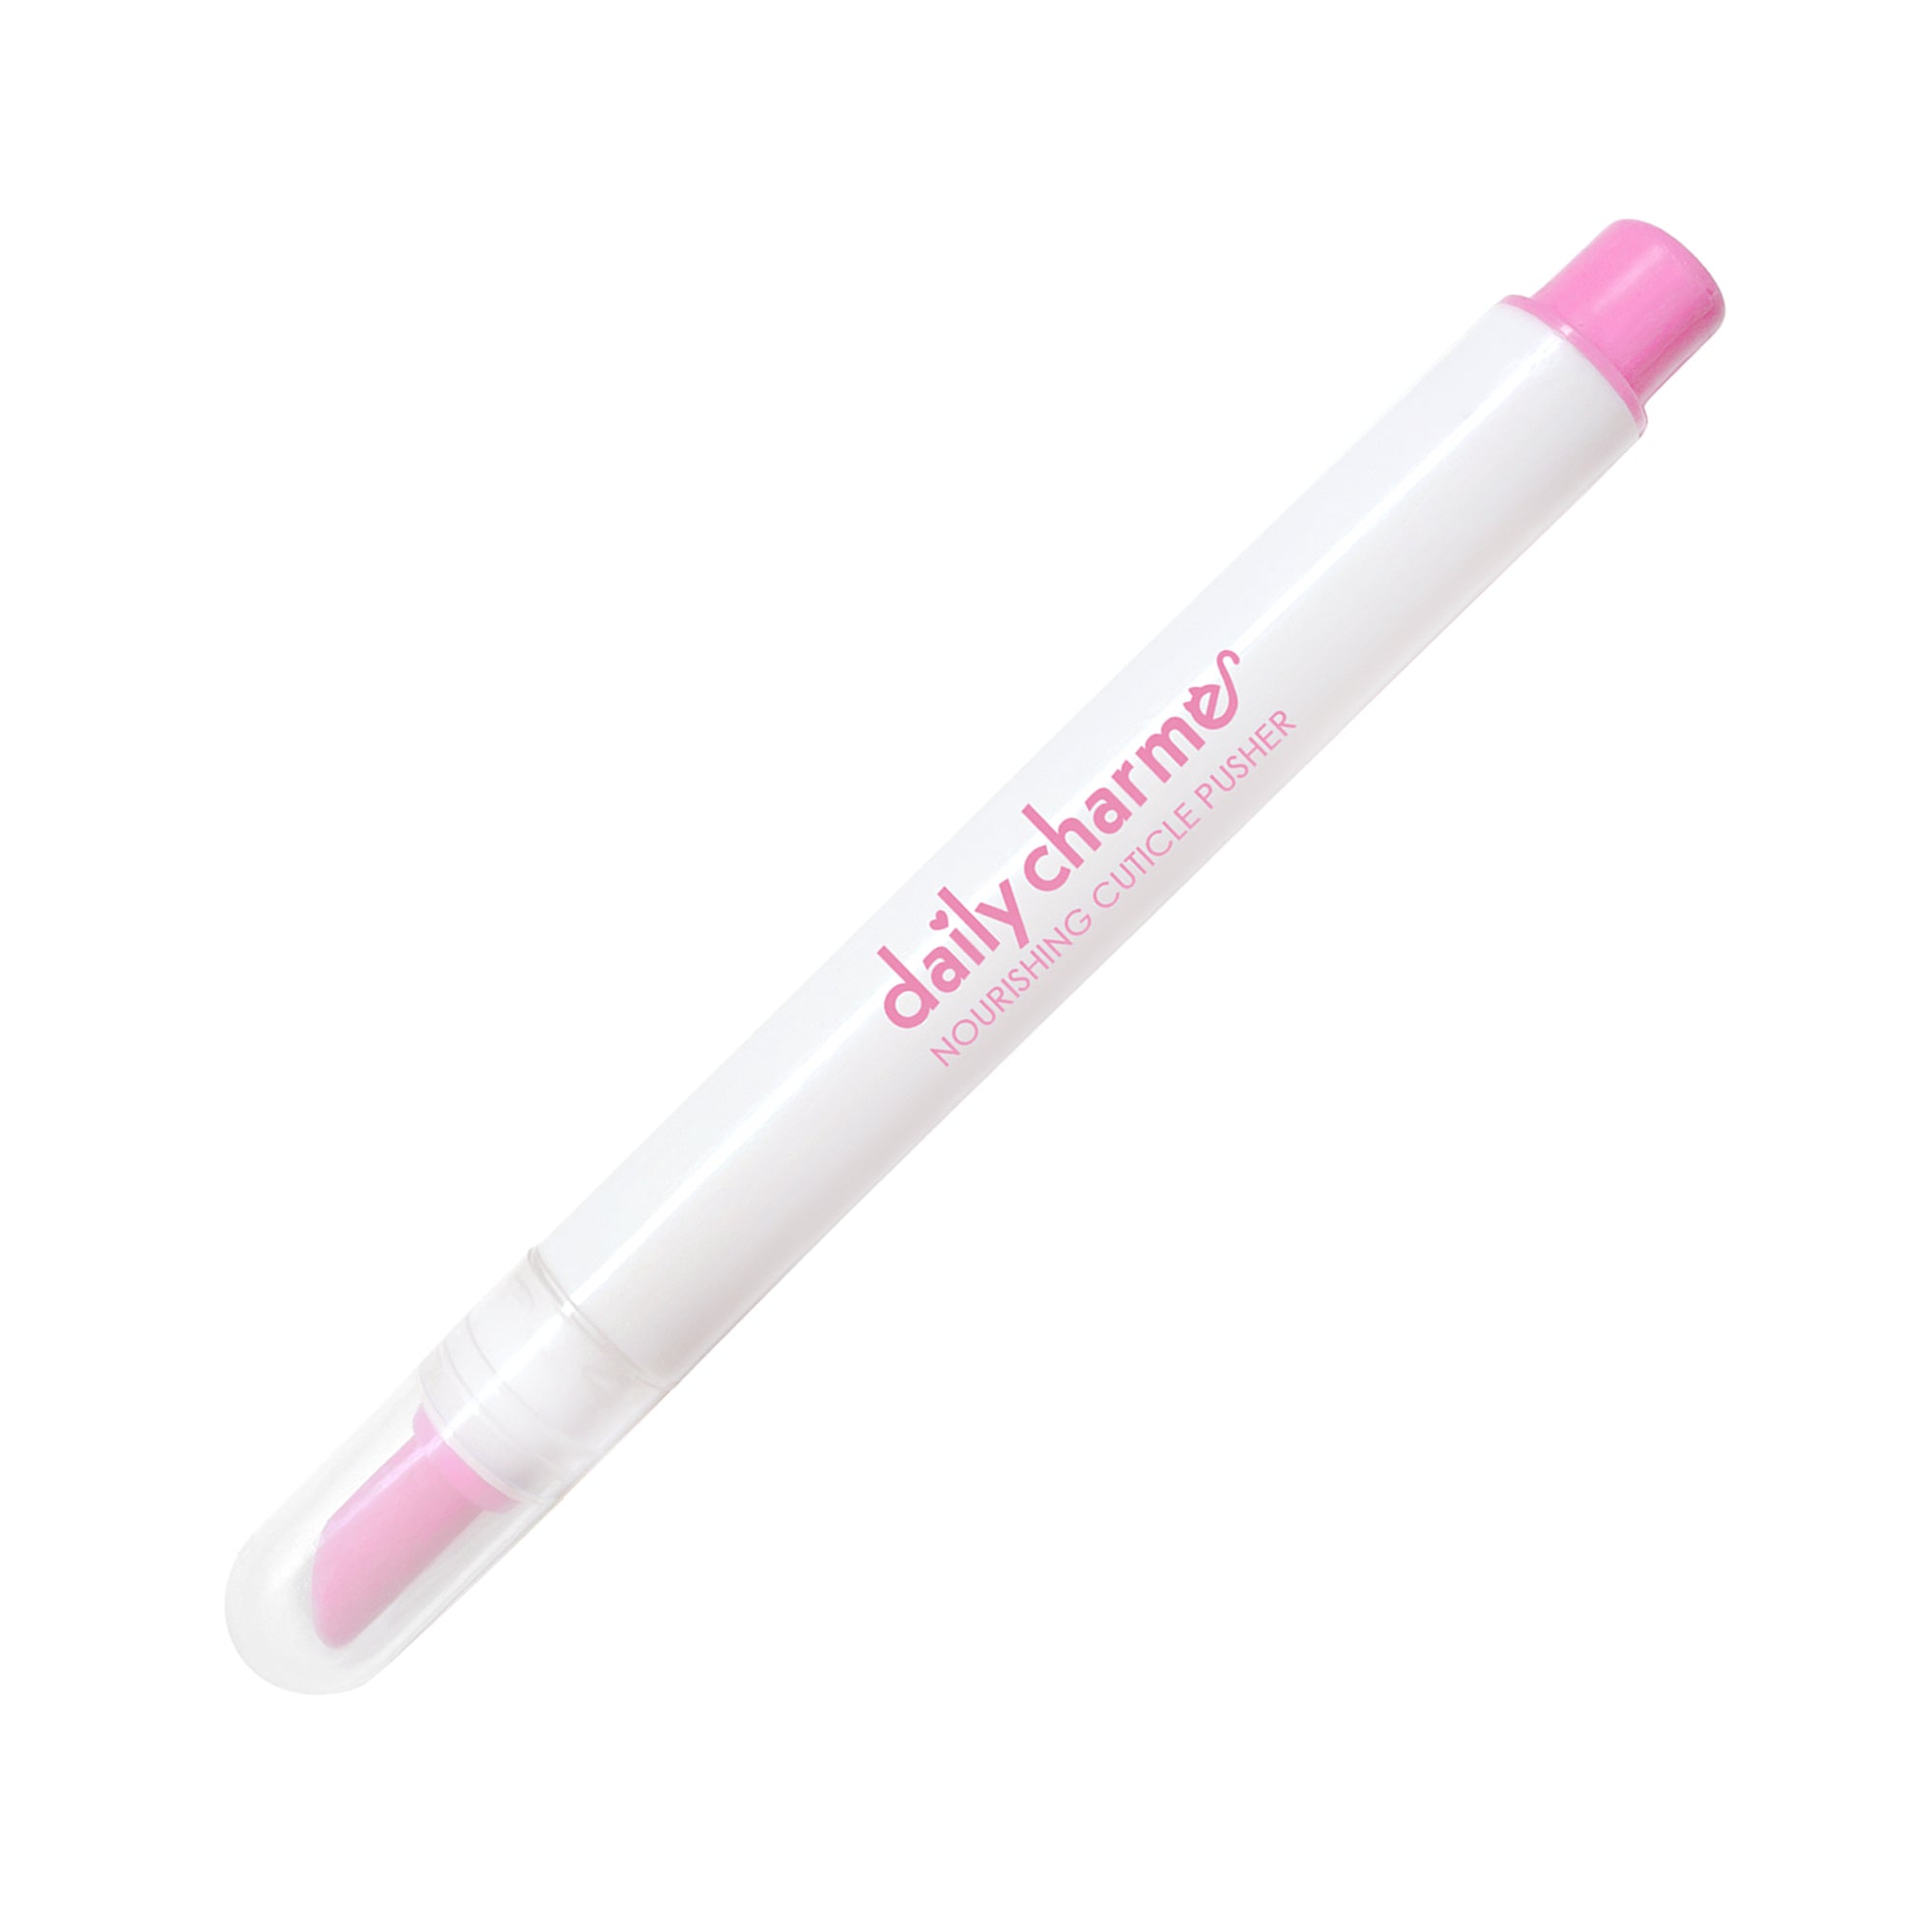 Daily Charme Nail Care | 2-in-1 Nourishing Cuticle Pusher with Oil